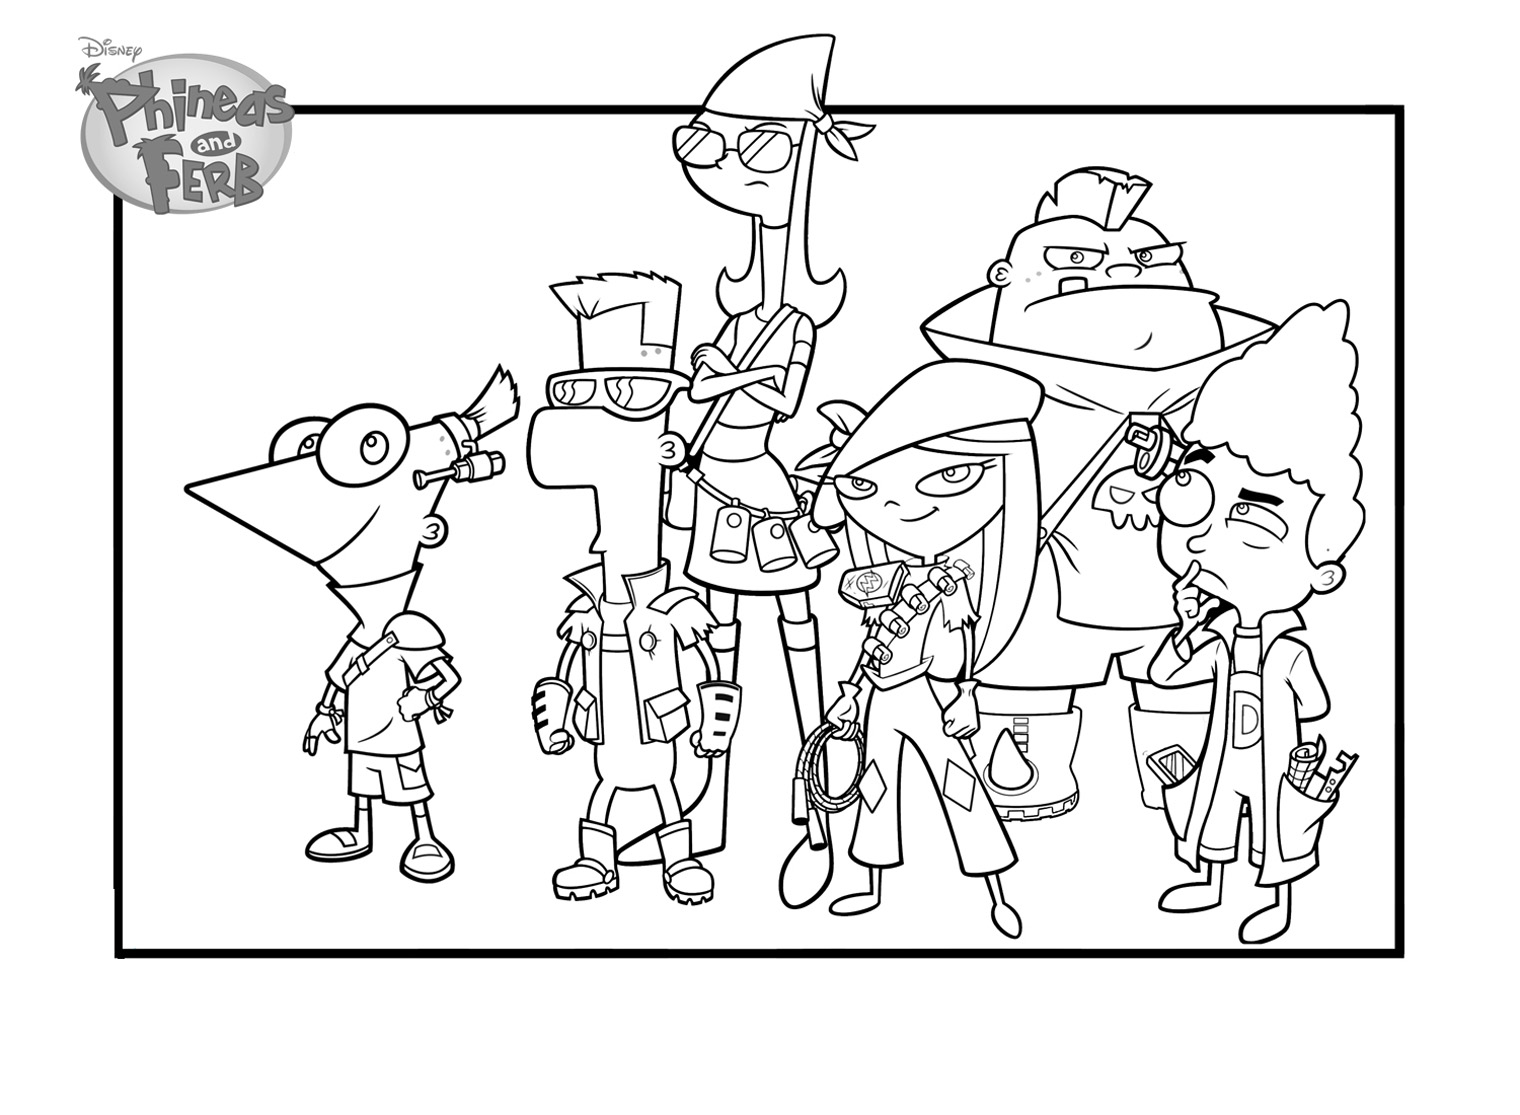 Color this beautiful coloring of Phineas and Ferb (Disney) with your favorite colors